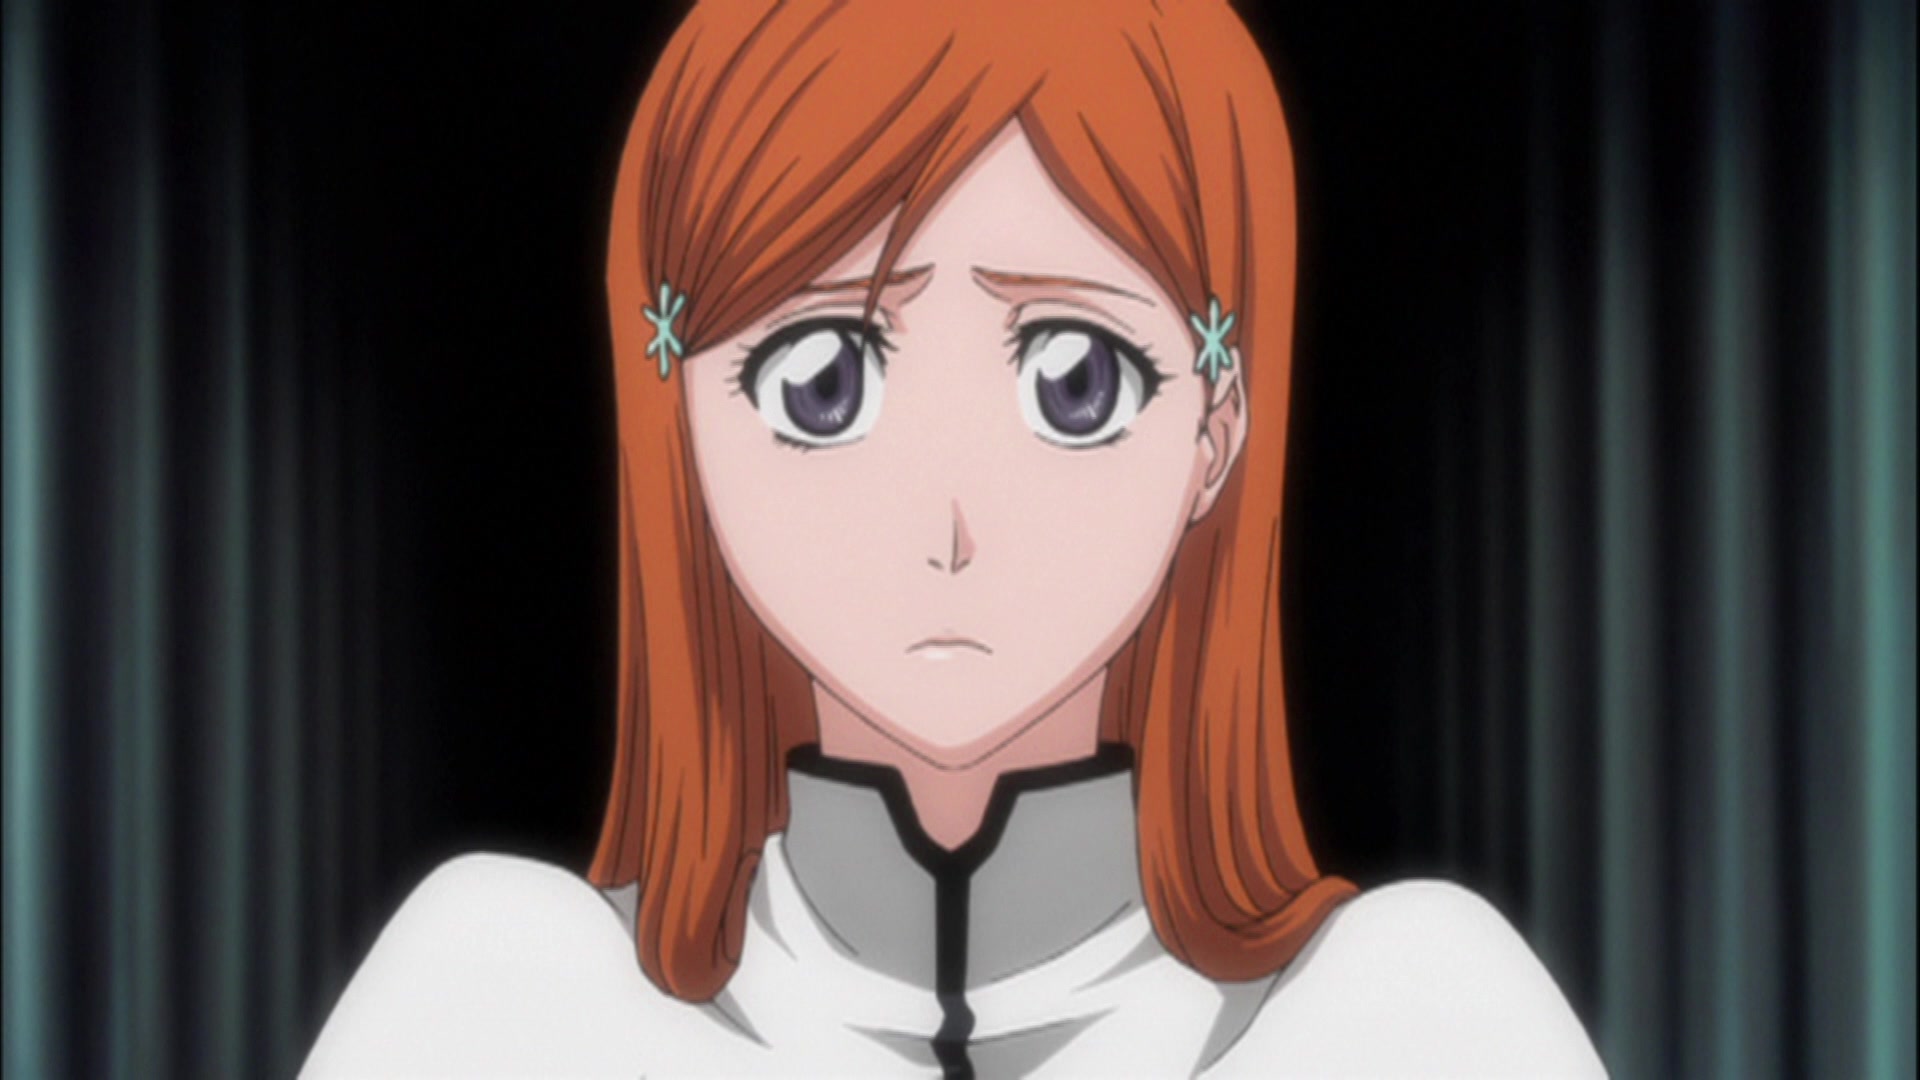 orihime should've fought more ,and especially against the Espada